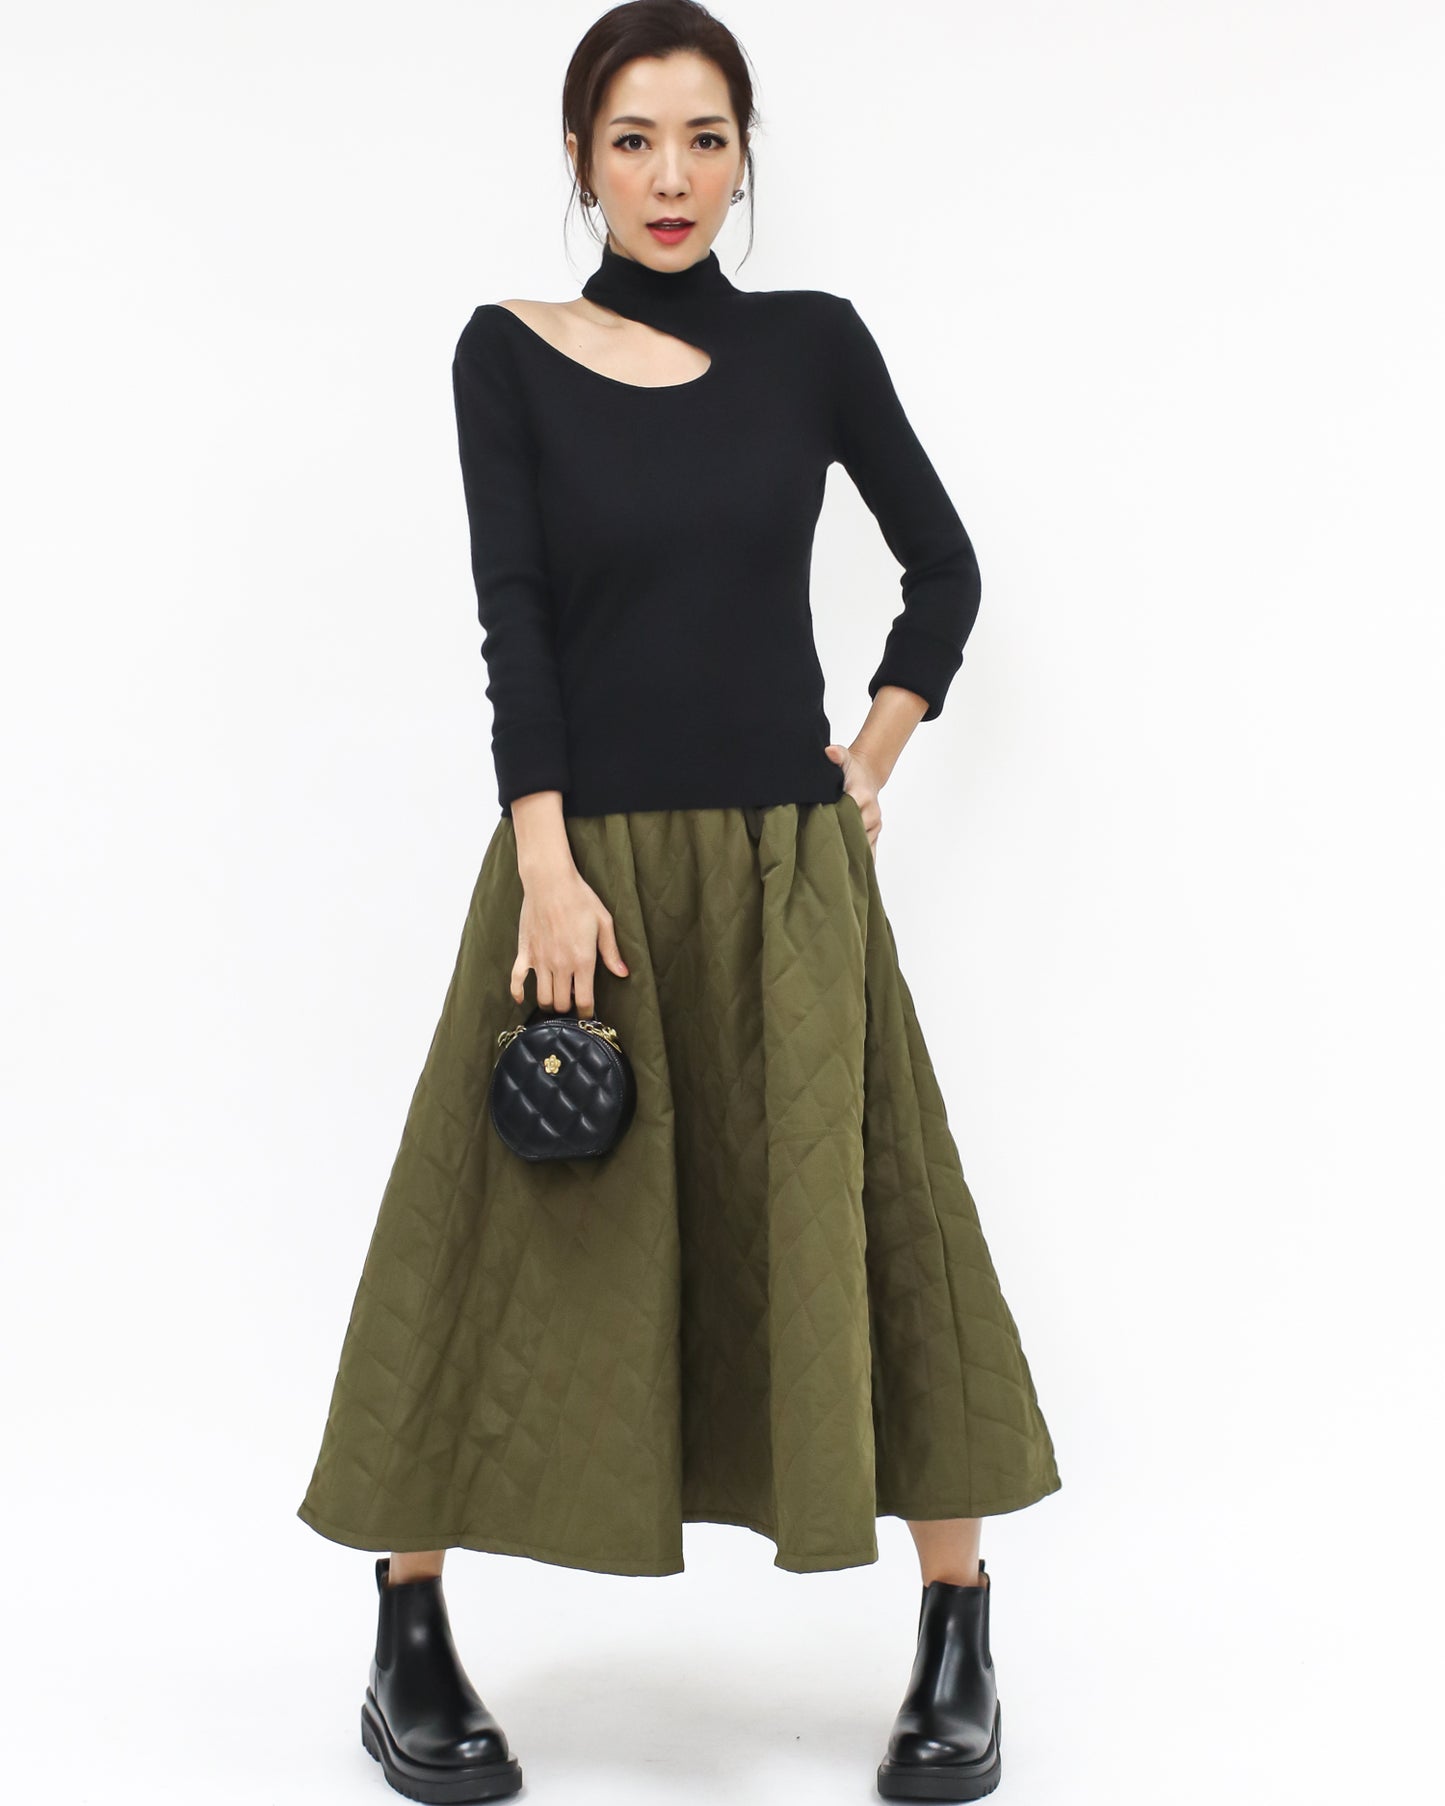 green quilted flare skirt *pre-order*